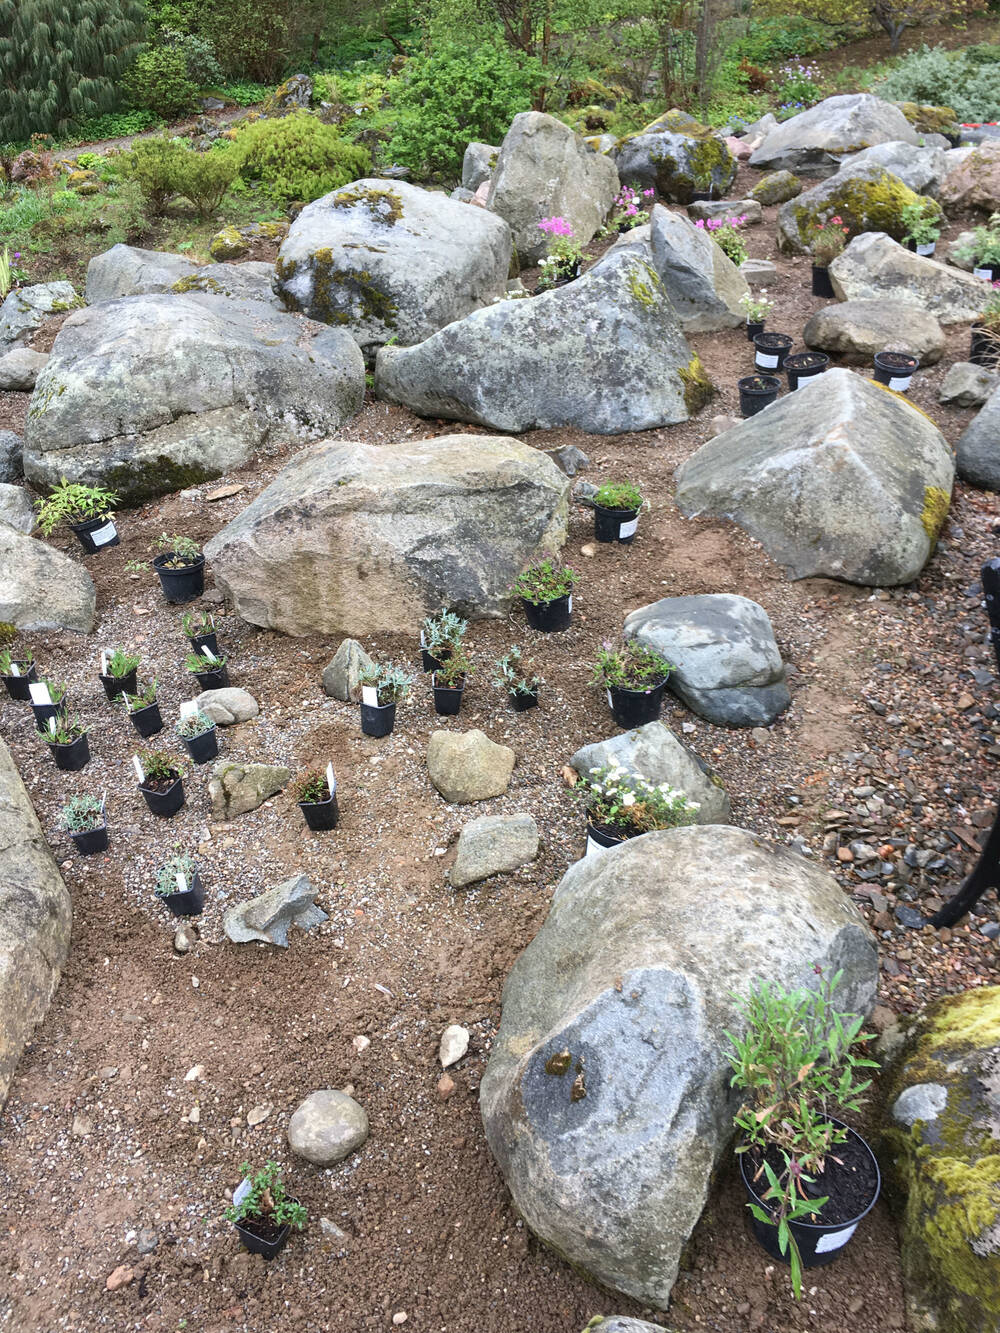 A rock garden with small pots of plants dotted around ready to be planted